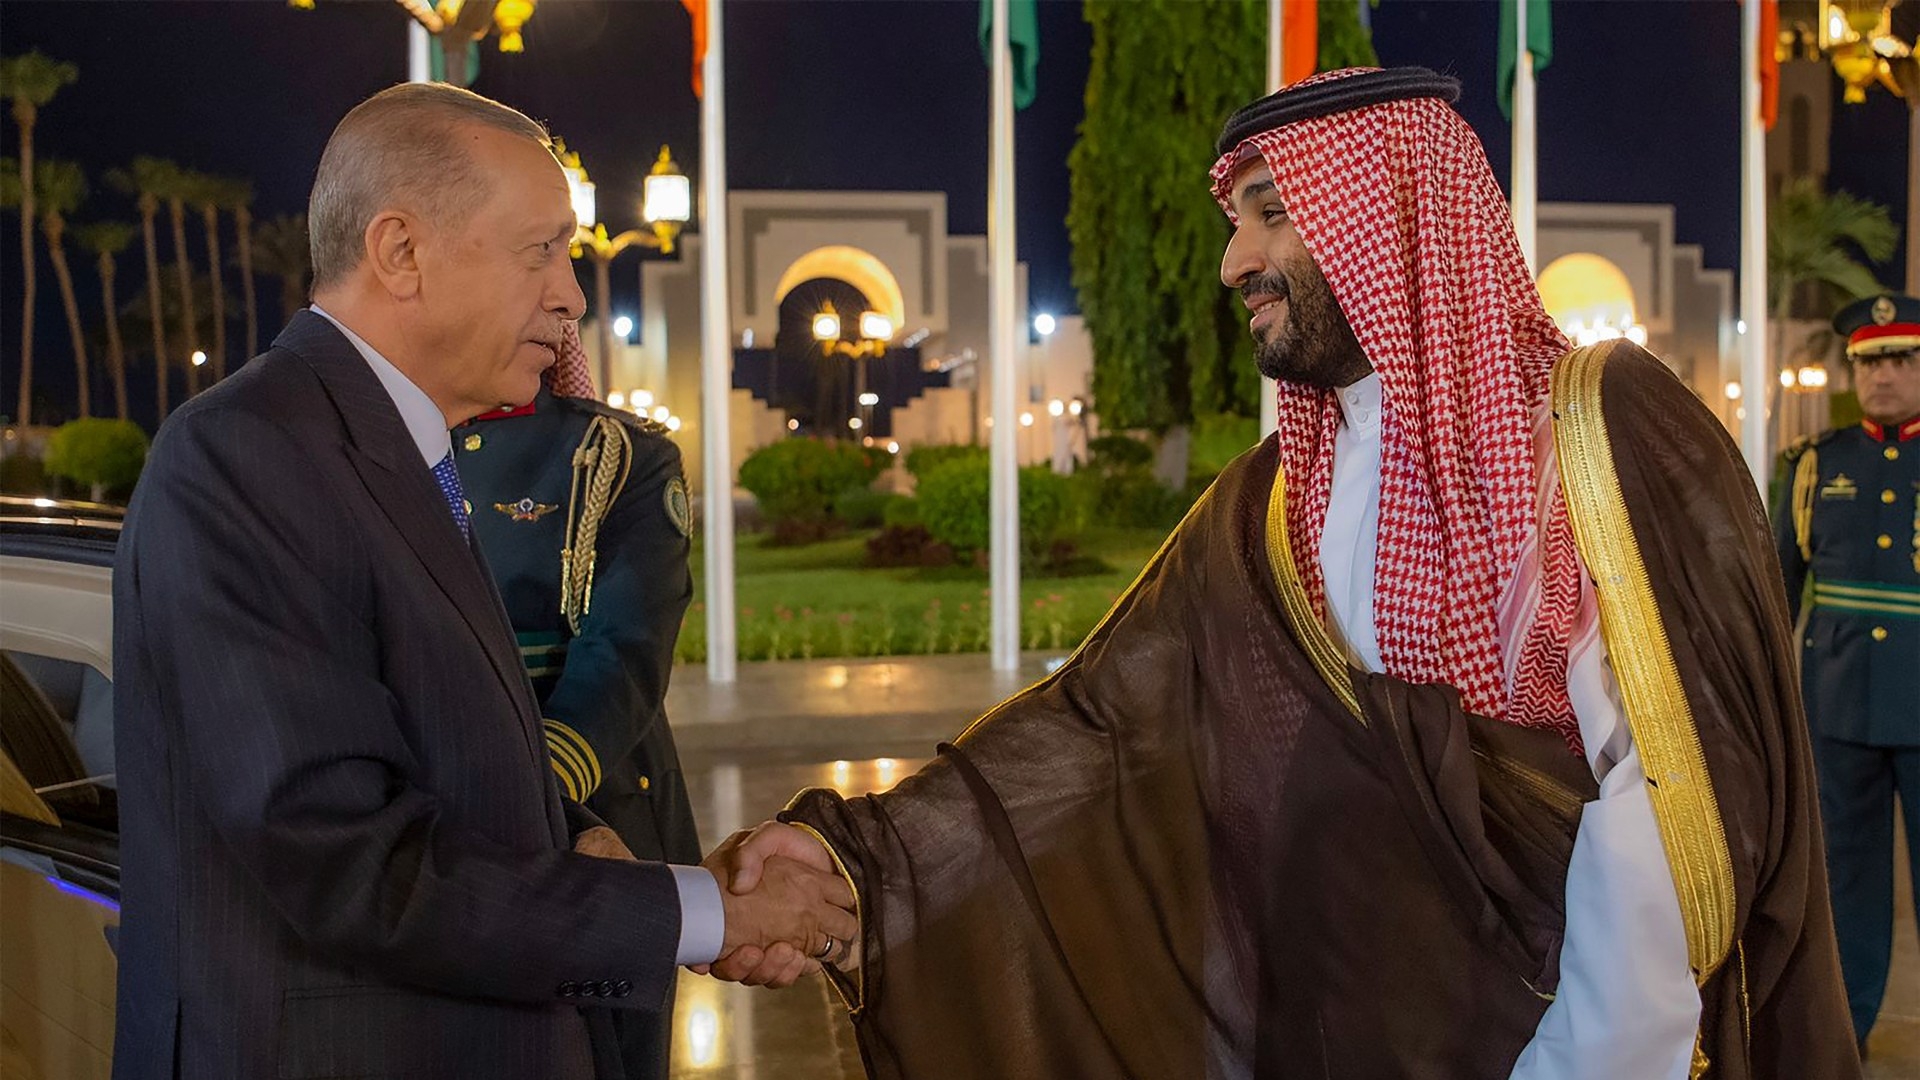 Turkish President Recep Tayyip Erdogan, left, and Saudi Crown Prince Mohammed bin Salman shake hands during a welcome ceremony in Jeddah 17 July (AP)